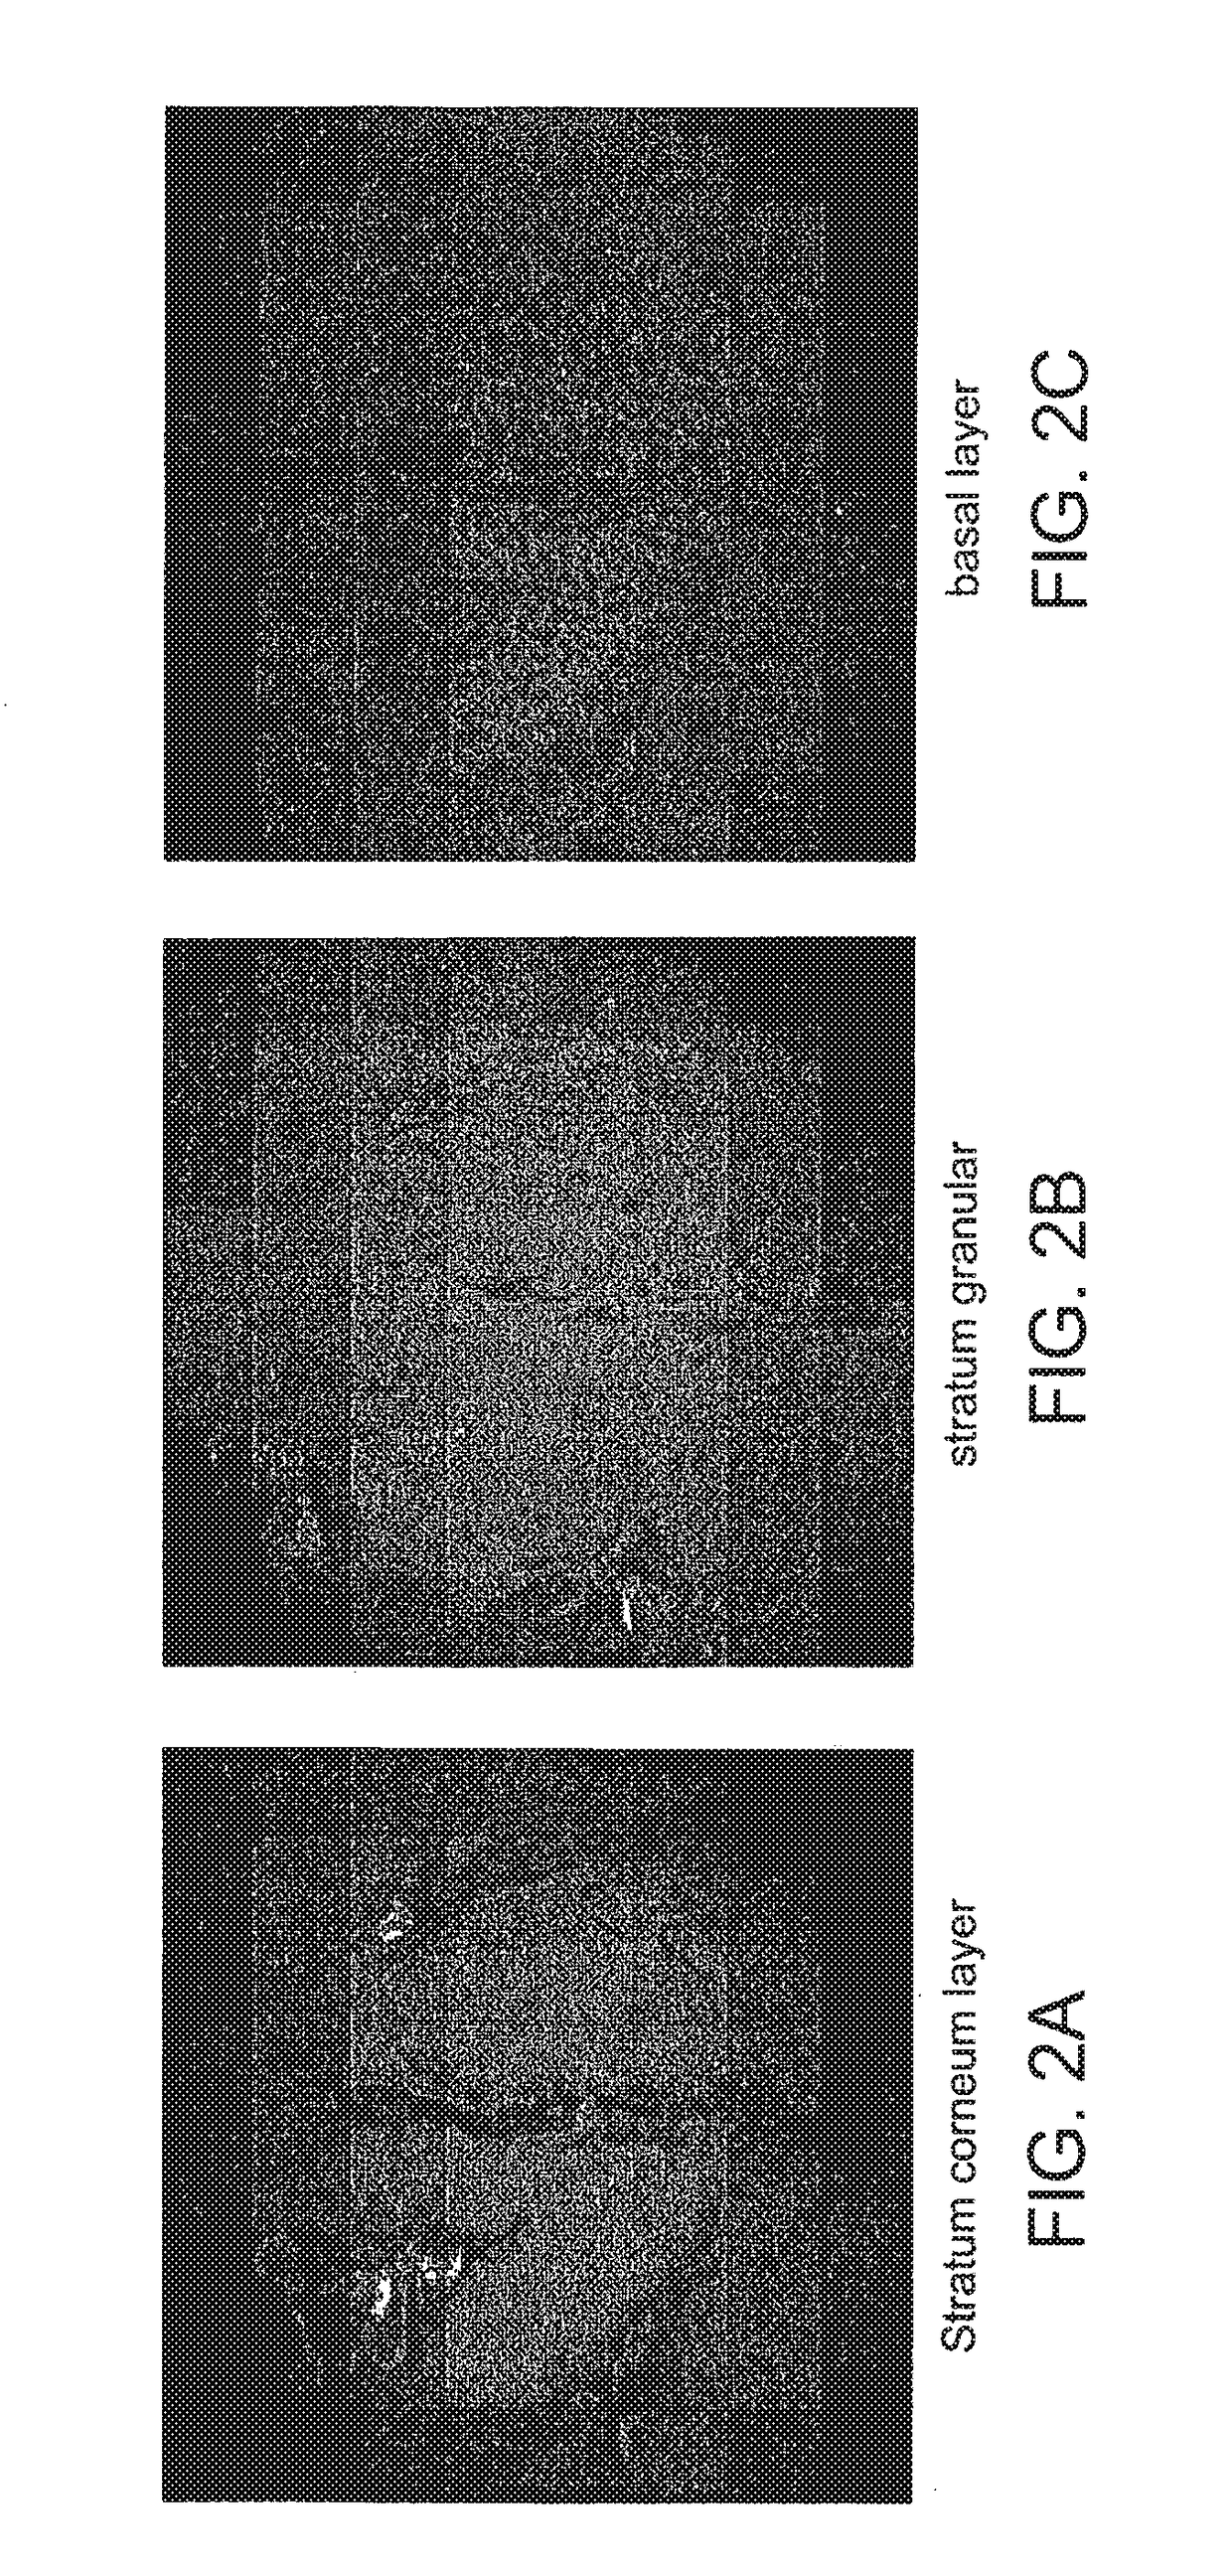 Multifocal imaging systems and method